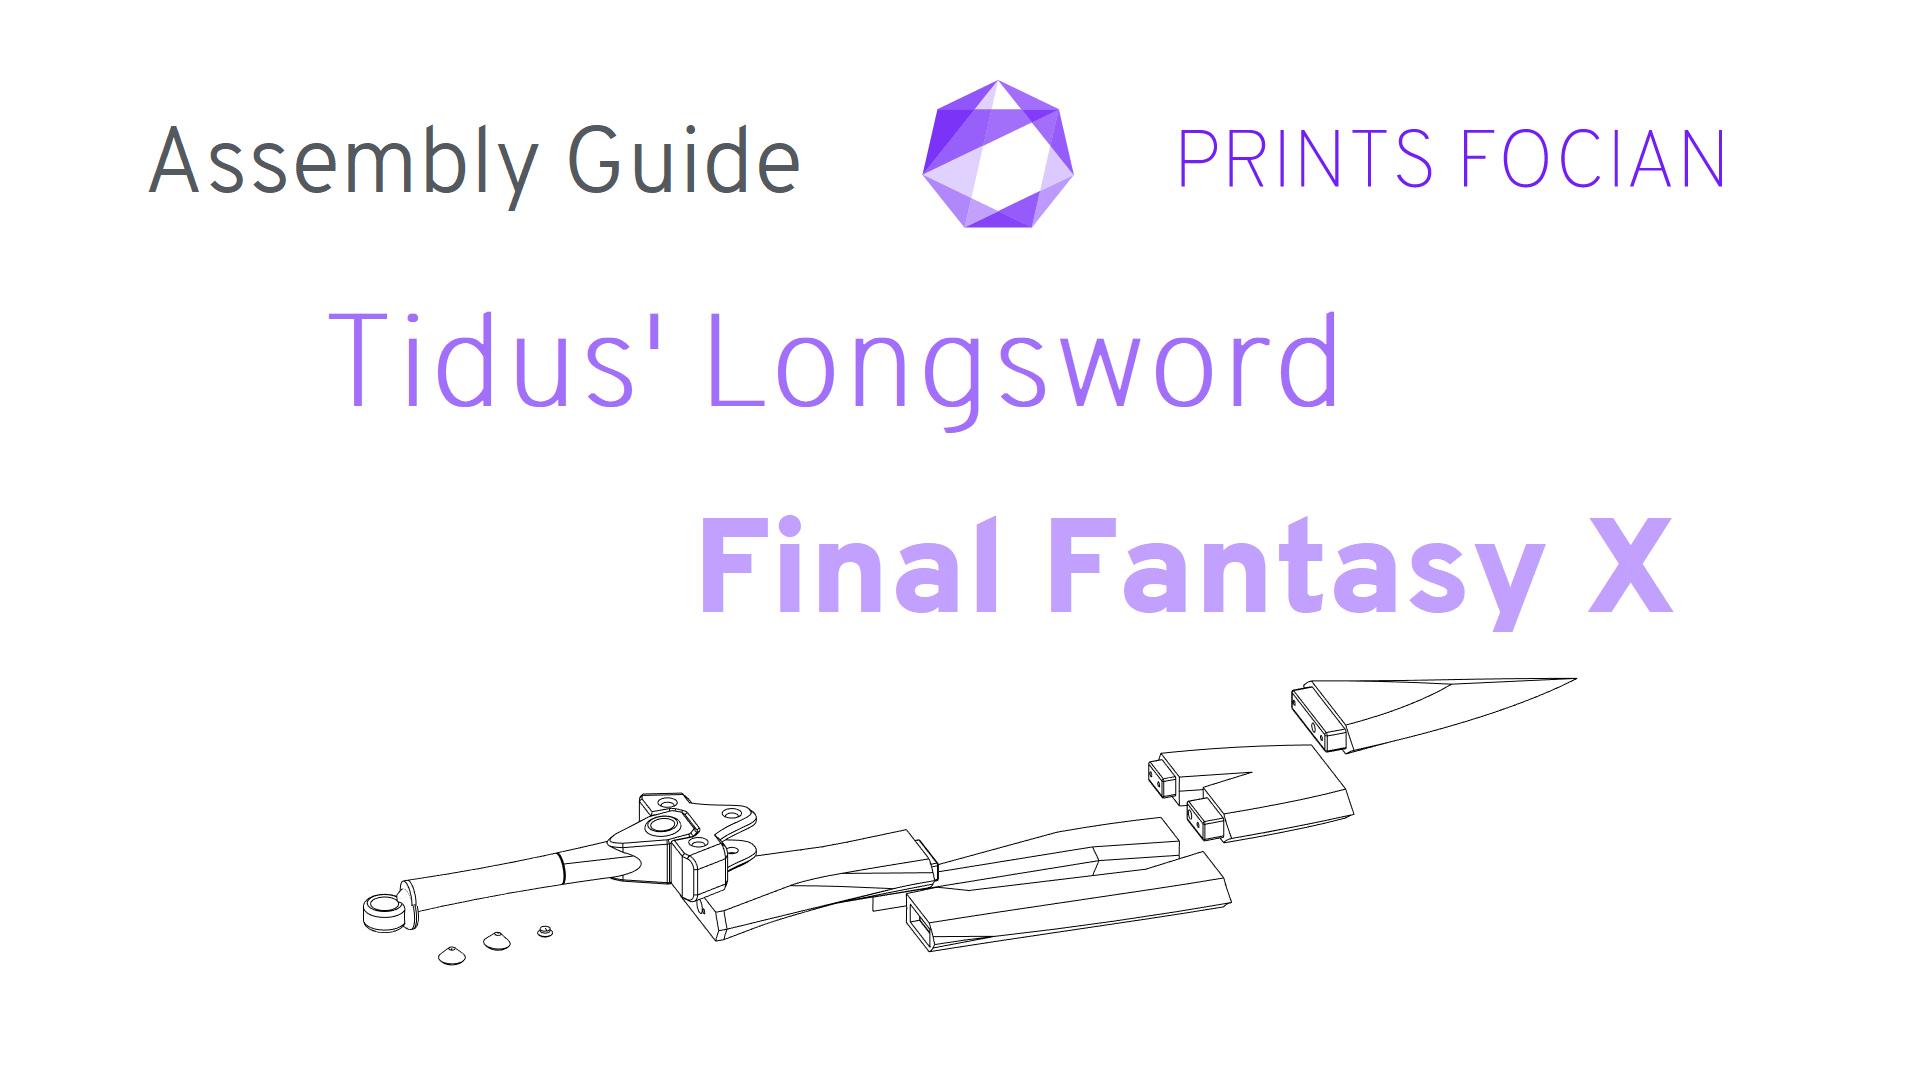 Wireframe exploded image of the Tidus' Longsword on a white background. Prints Focian Icon top and central. Text: Purple Prints Focian, Tidus' Longsword, FInal Fantasy X and dark grey Assembly Guide